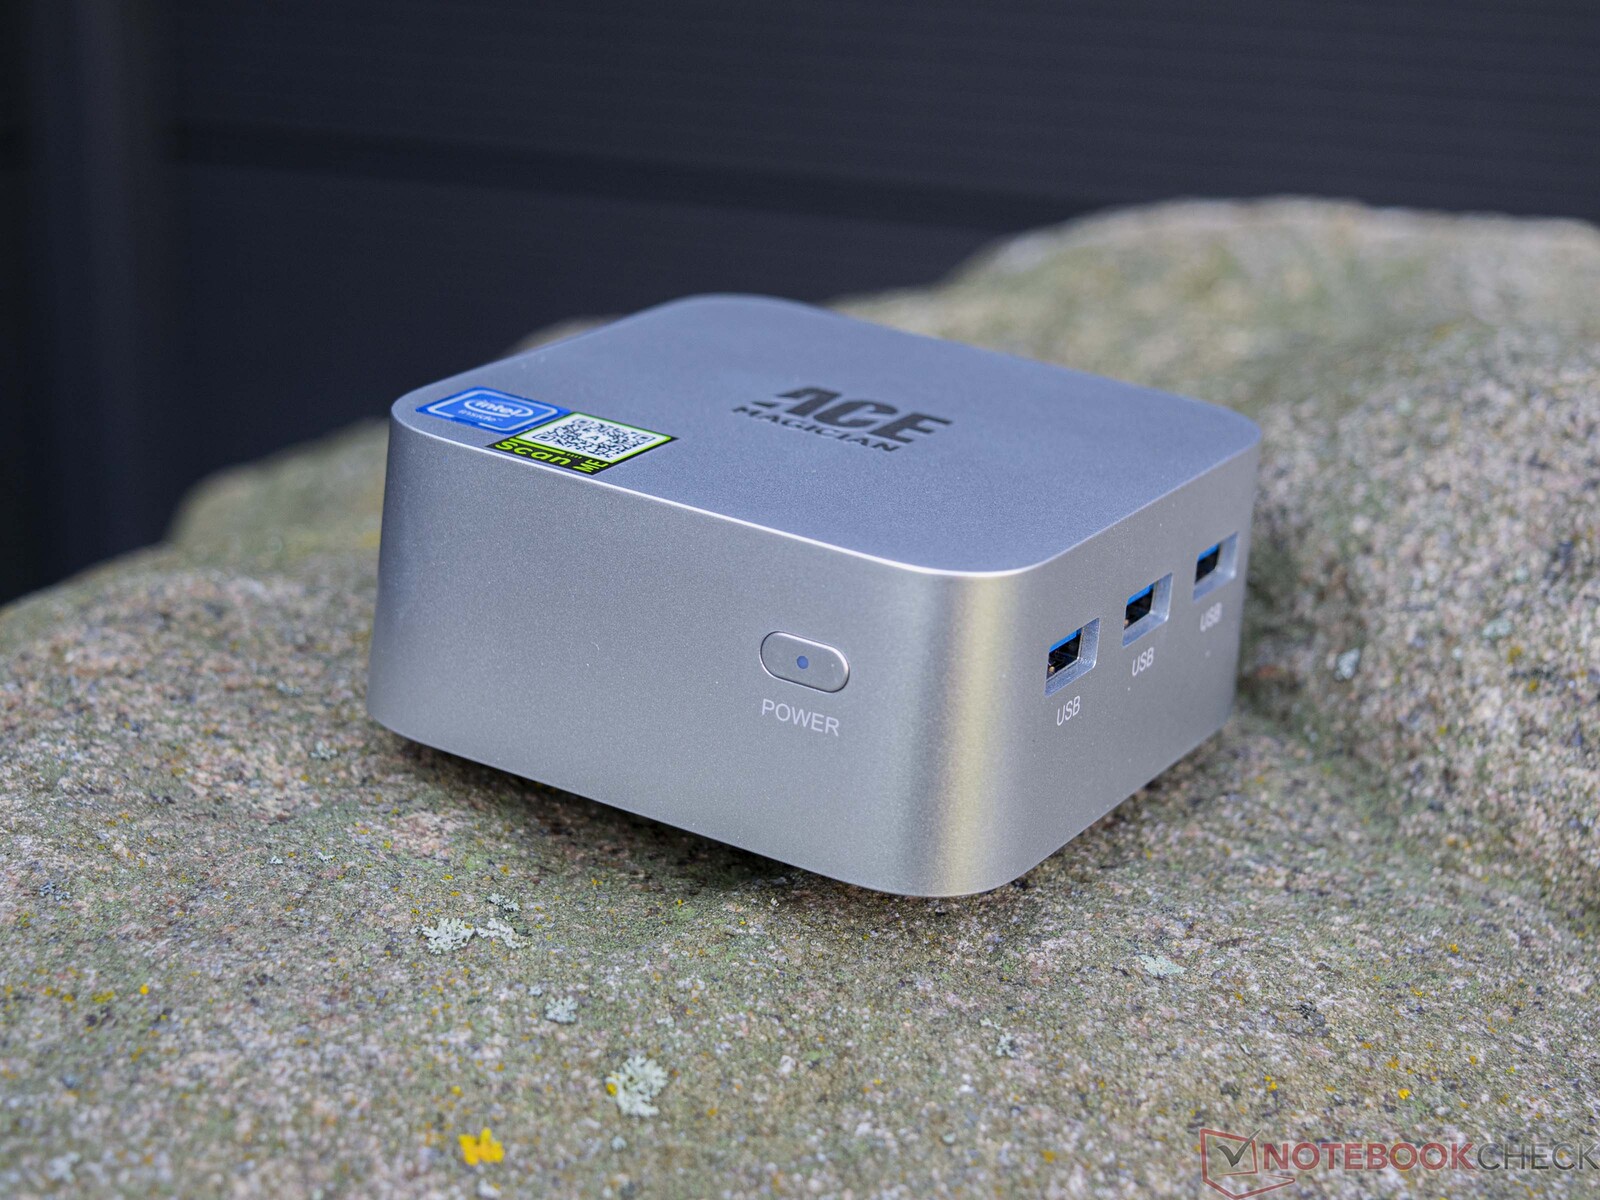 Ace Magician T8Pro review: Budget mini PC for office use